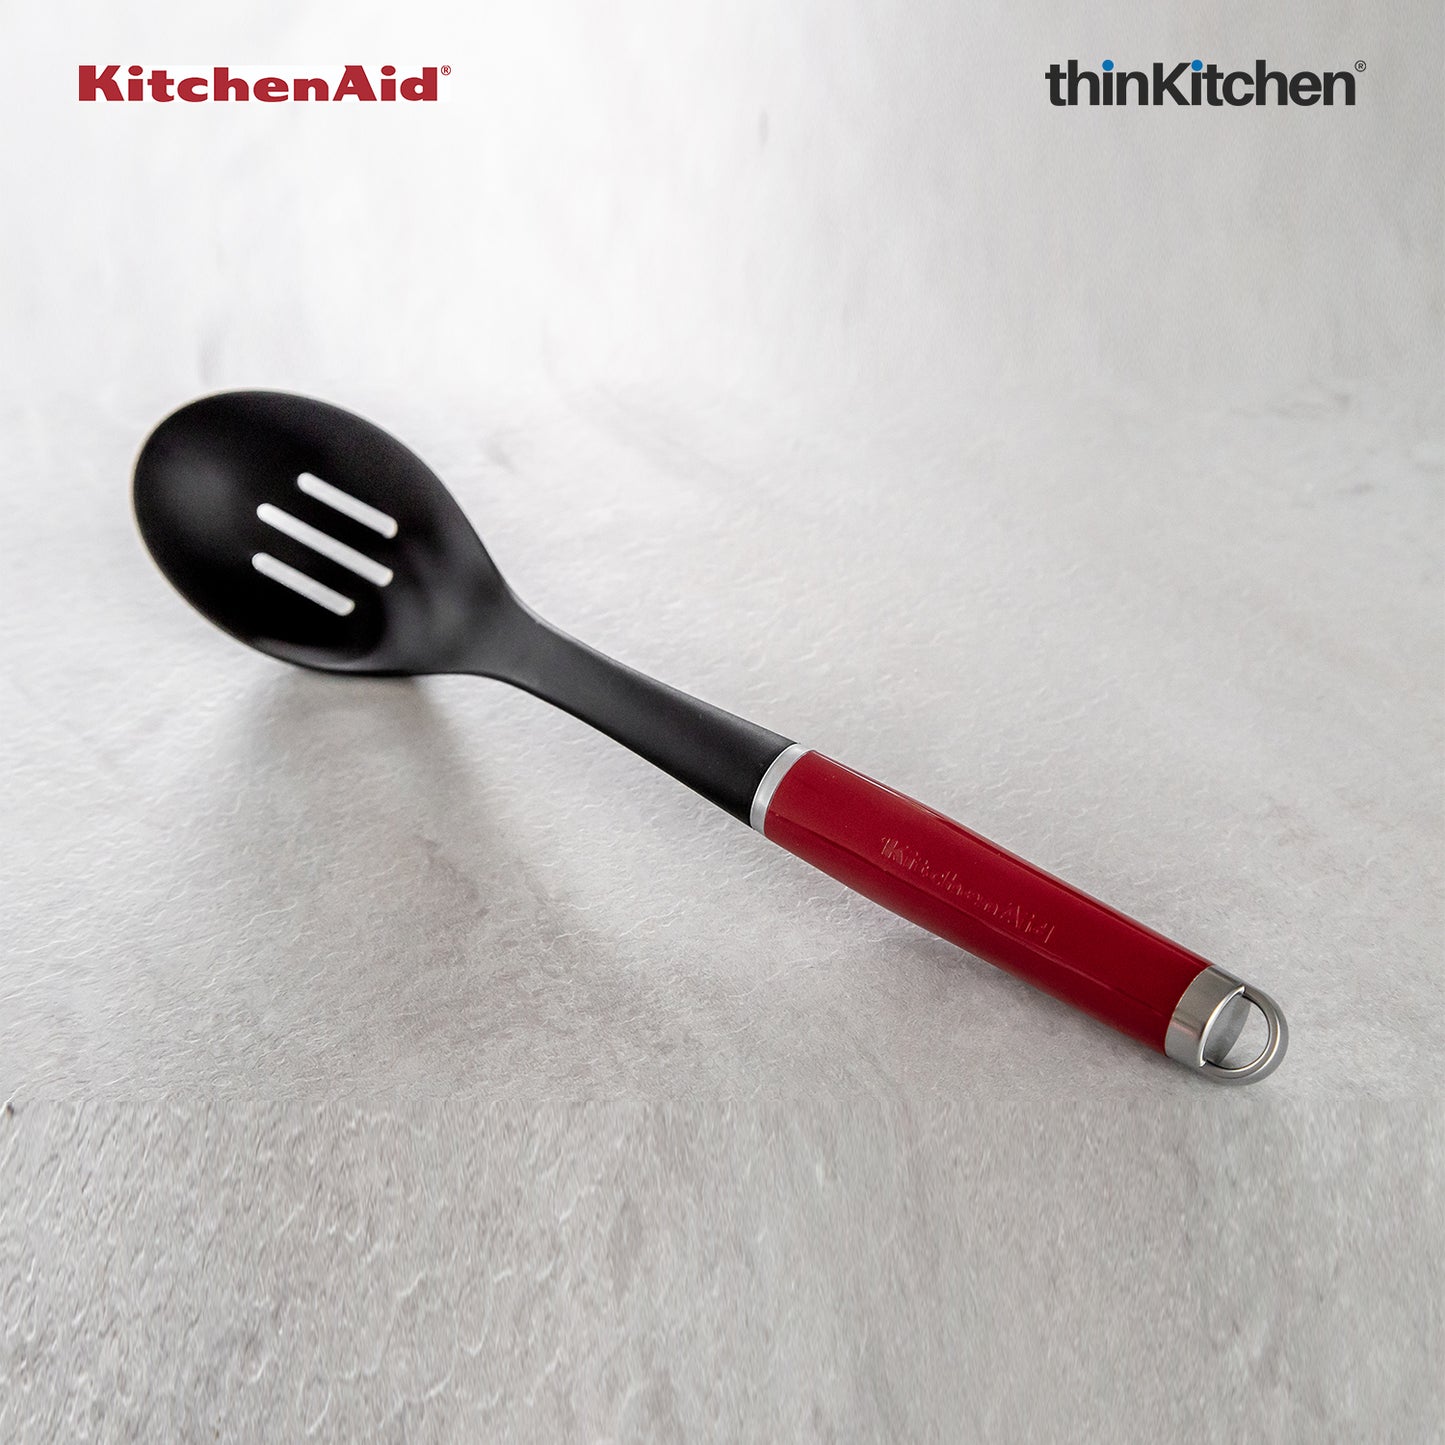 Kitchenaid Slotted Spoon Empire Red